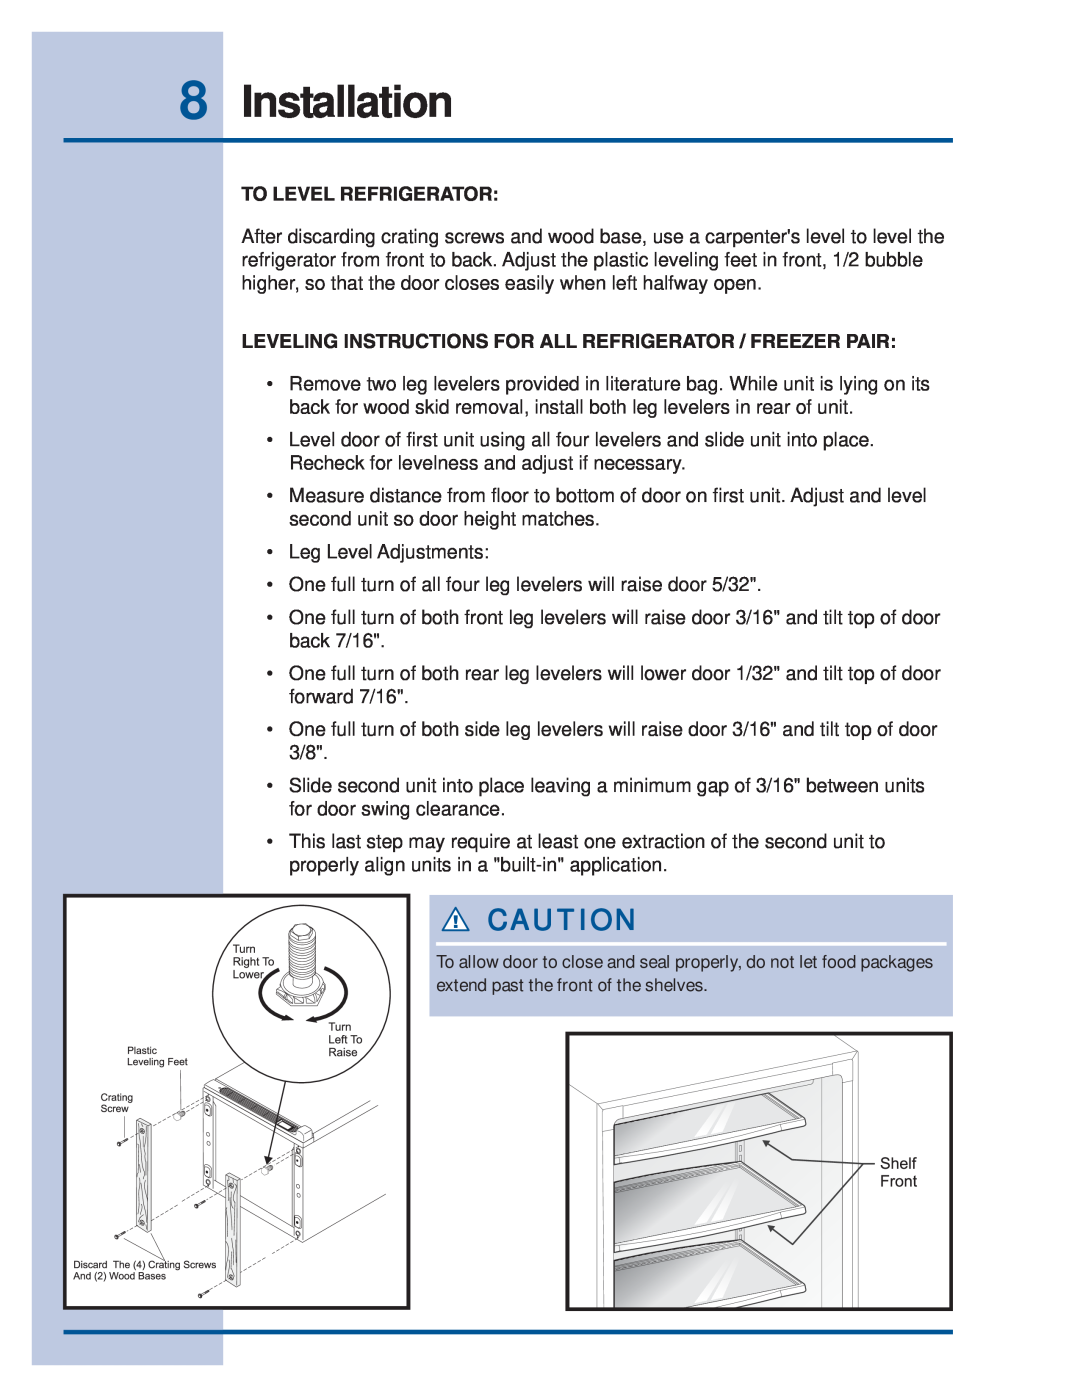 Electrolux 297122800 (0608) Installation, To Level Refrigerator, Leveling Instructions For All Refrigerator / Freezer Pair 